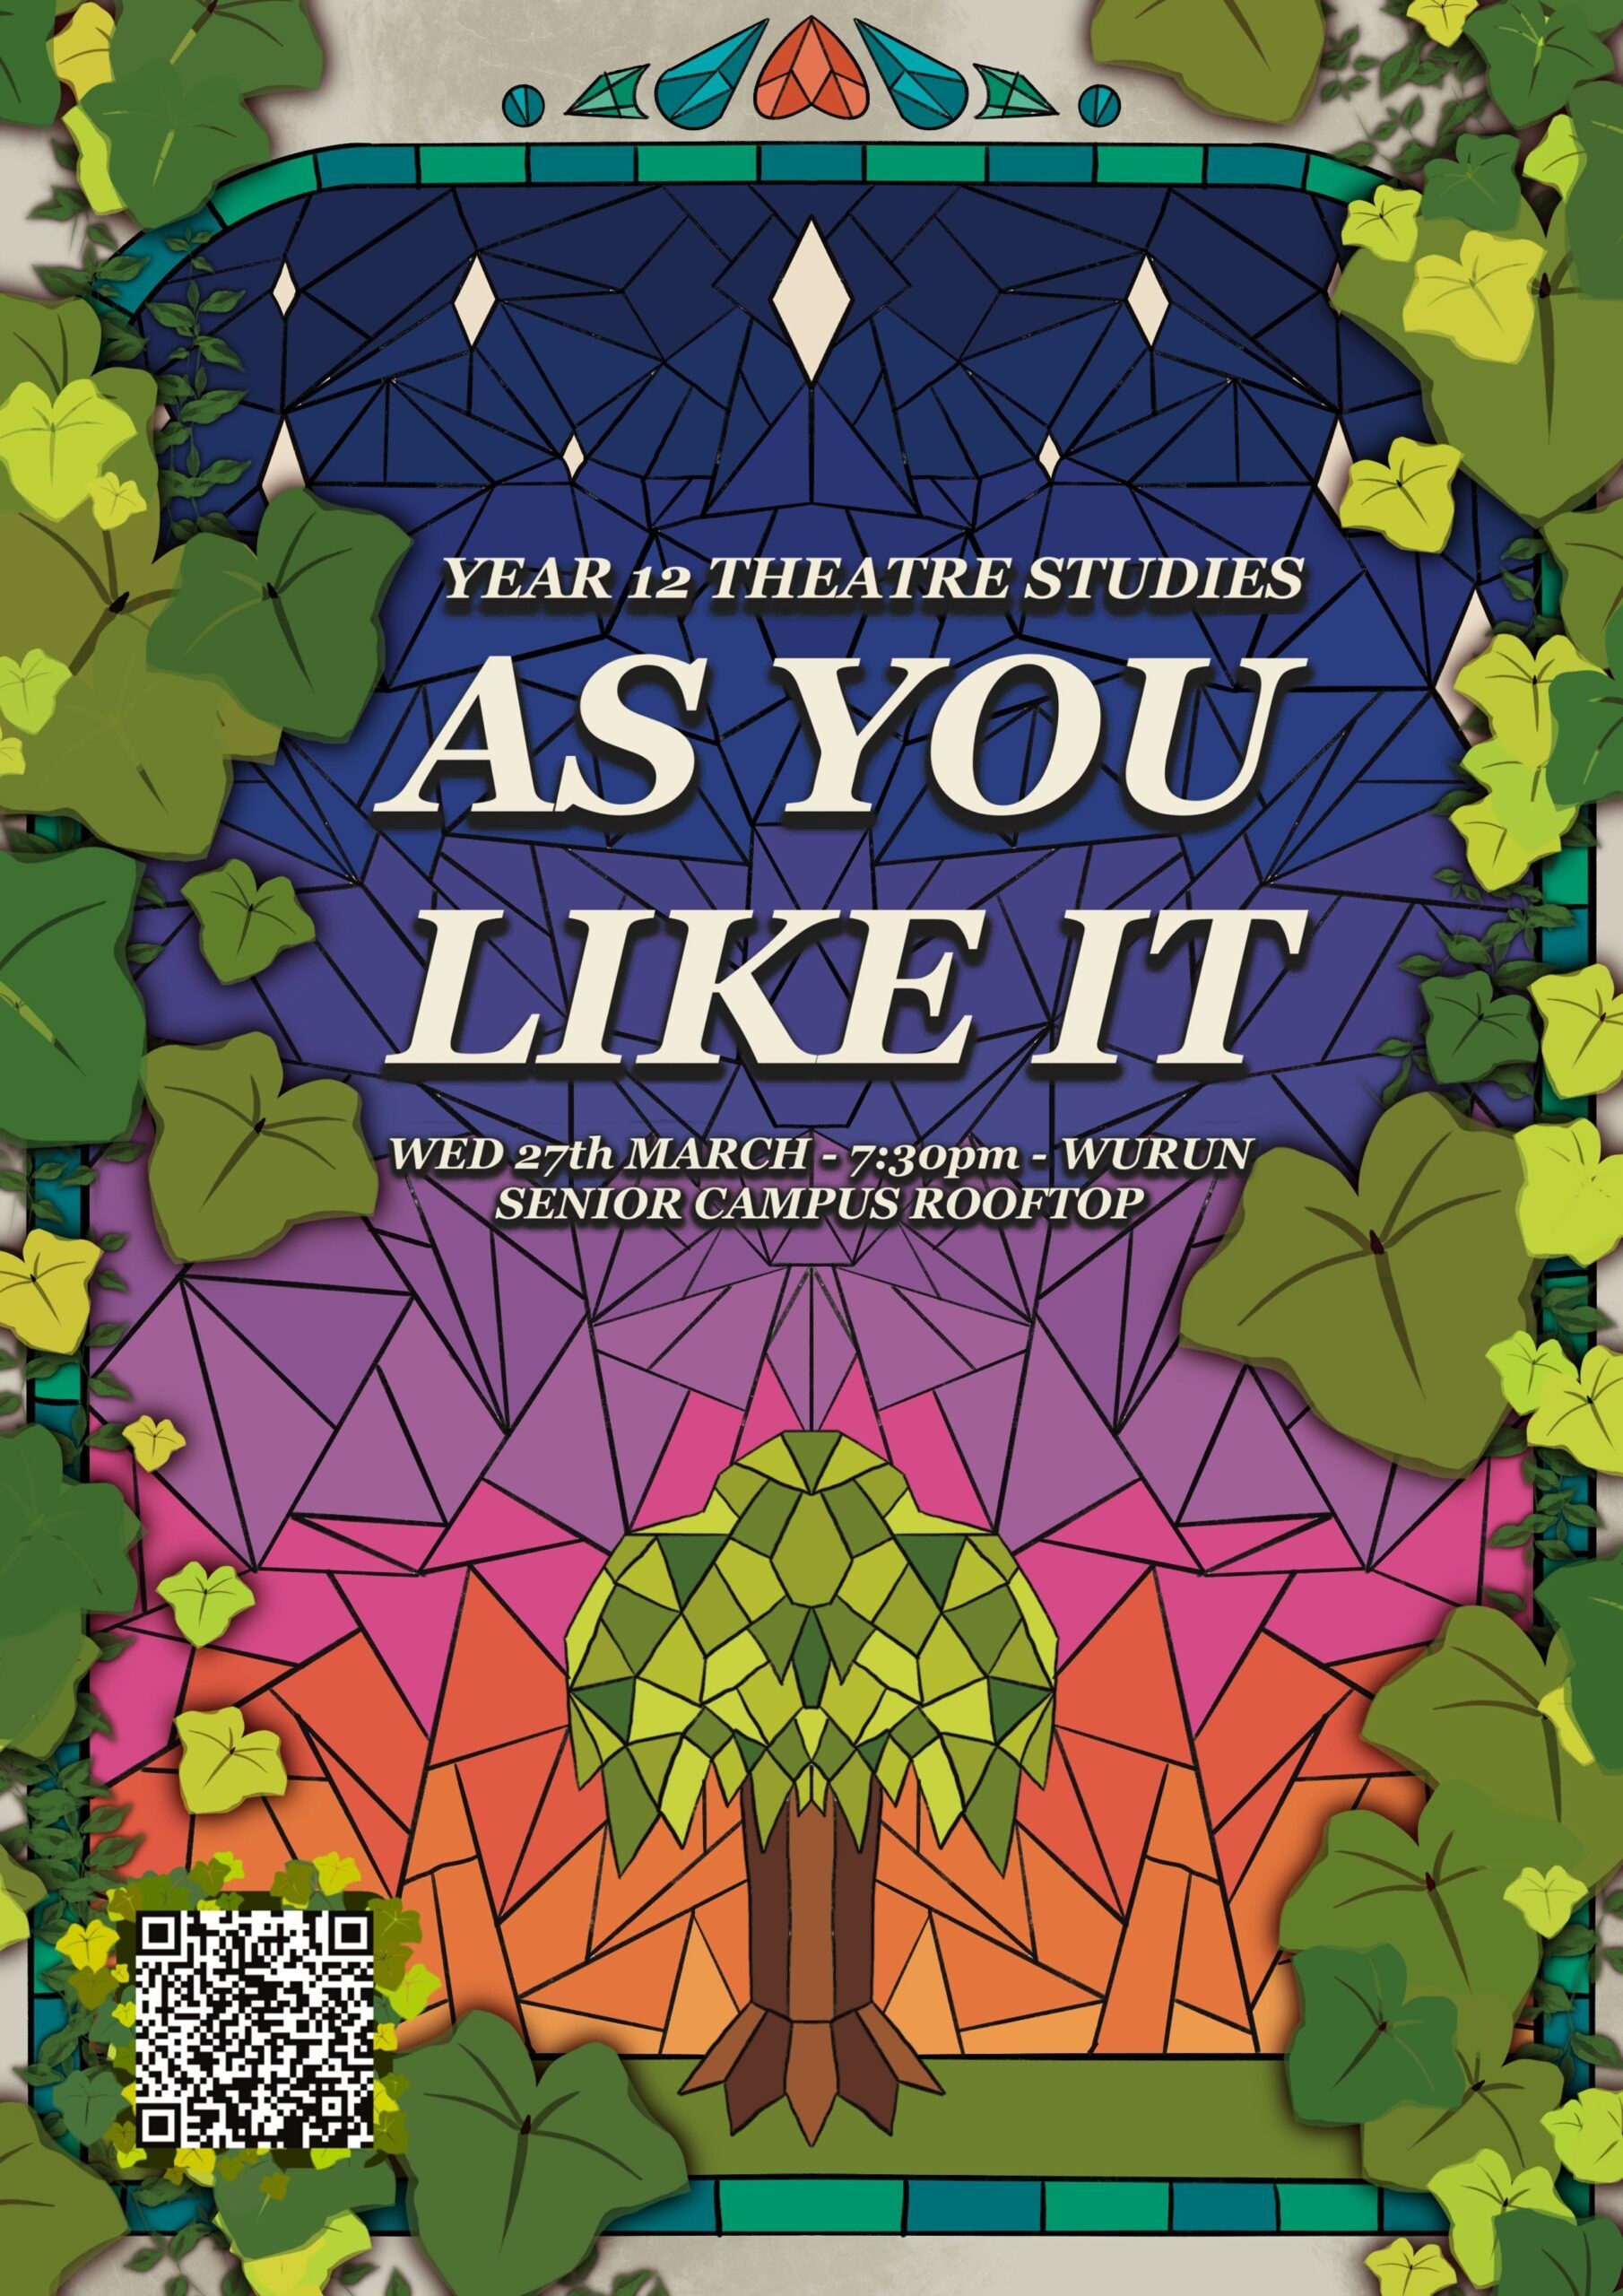 As You Like It Poster A4 scaled - Fitzroy High School - Embrace a bold & ambitious future.